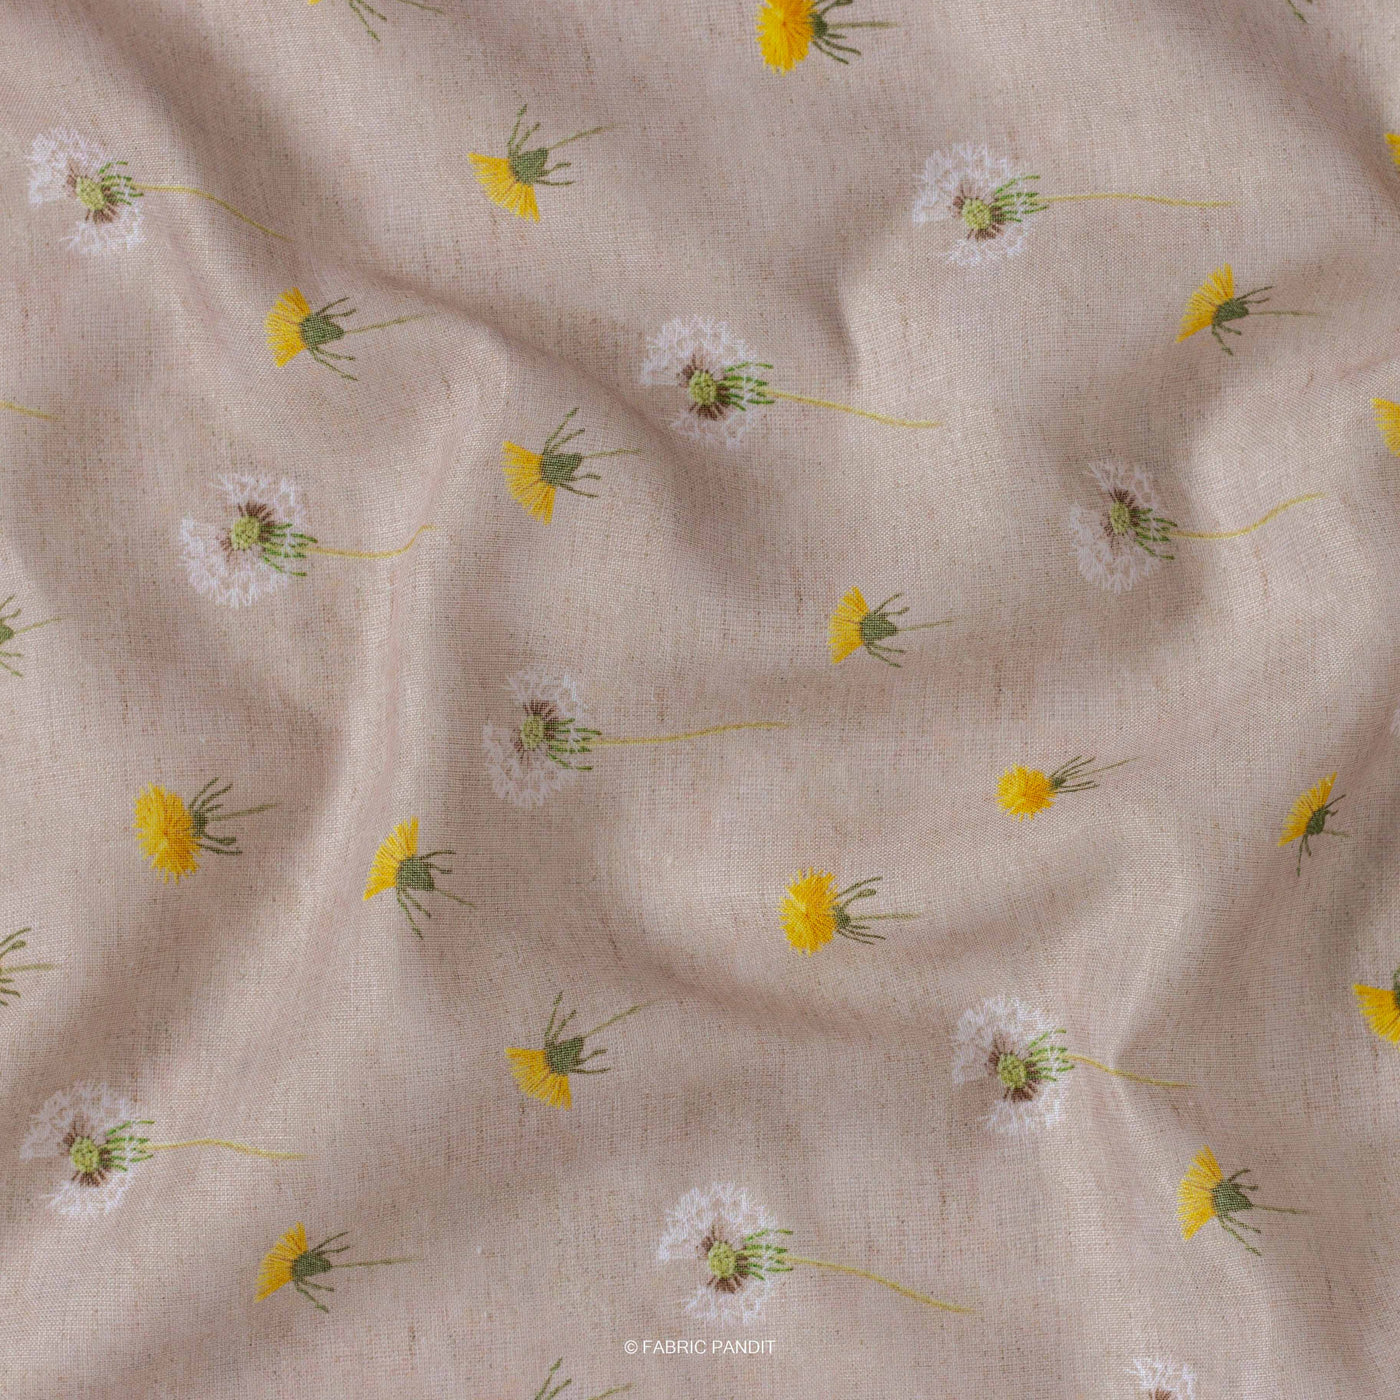 Digital Printed Linen Neps Fabric Yellow And White Pollen Flower Digital Printed Linen Neps Fabric (Width 44 Inches)